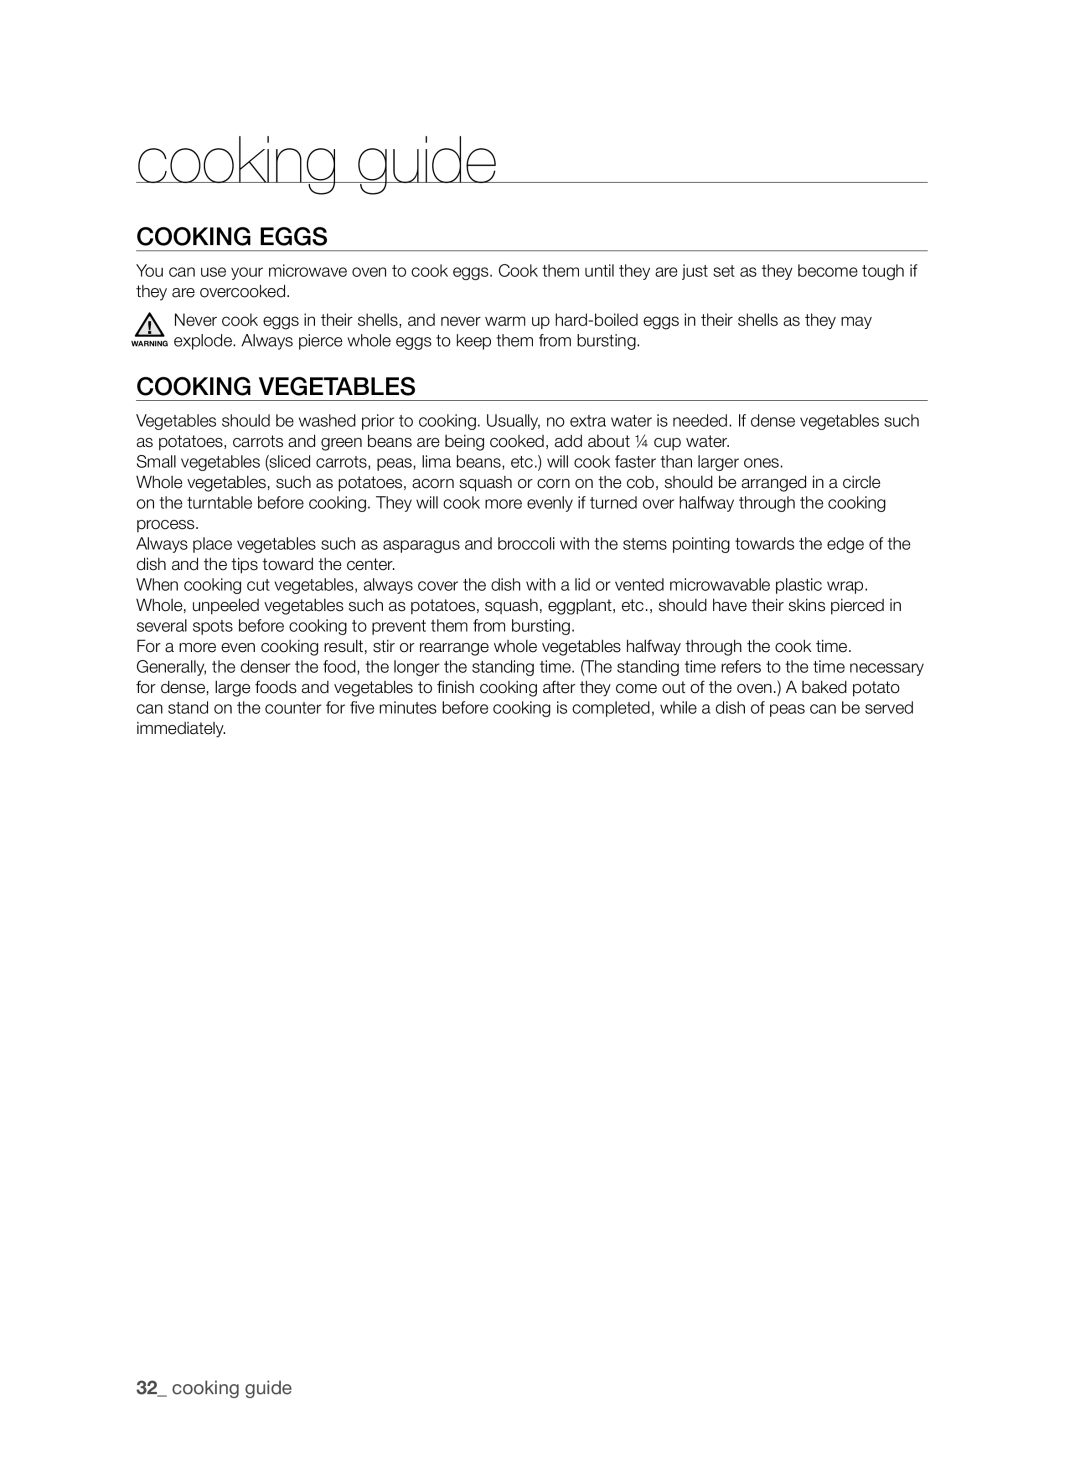 Samsung SMH7185 user manual Cooking eggs, Cooking vegetables, cooking guide 